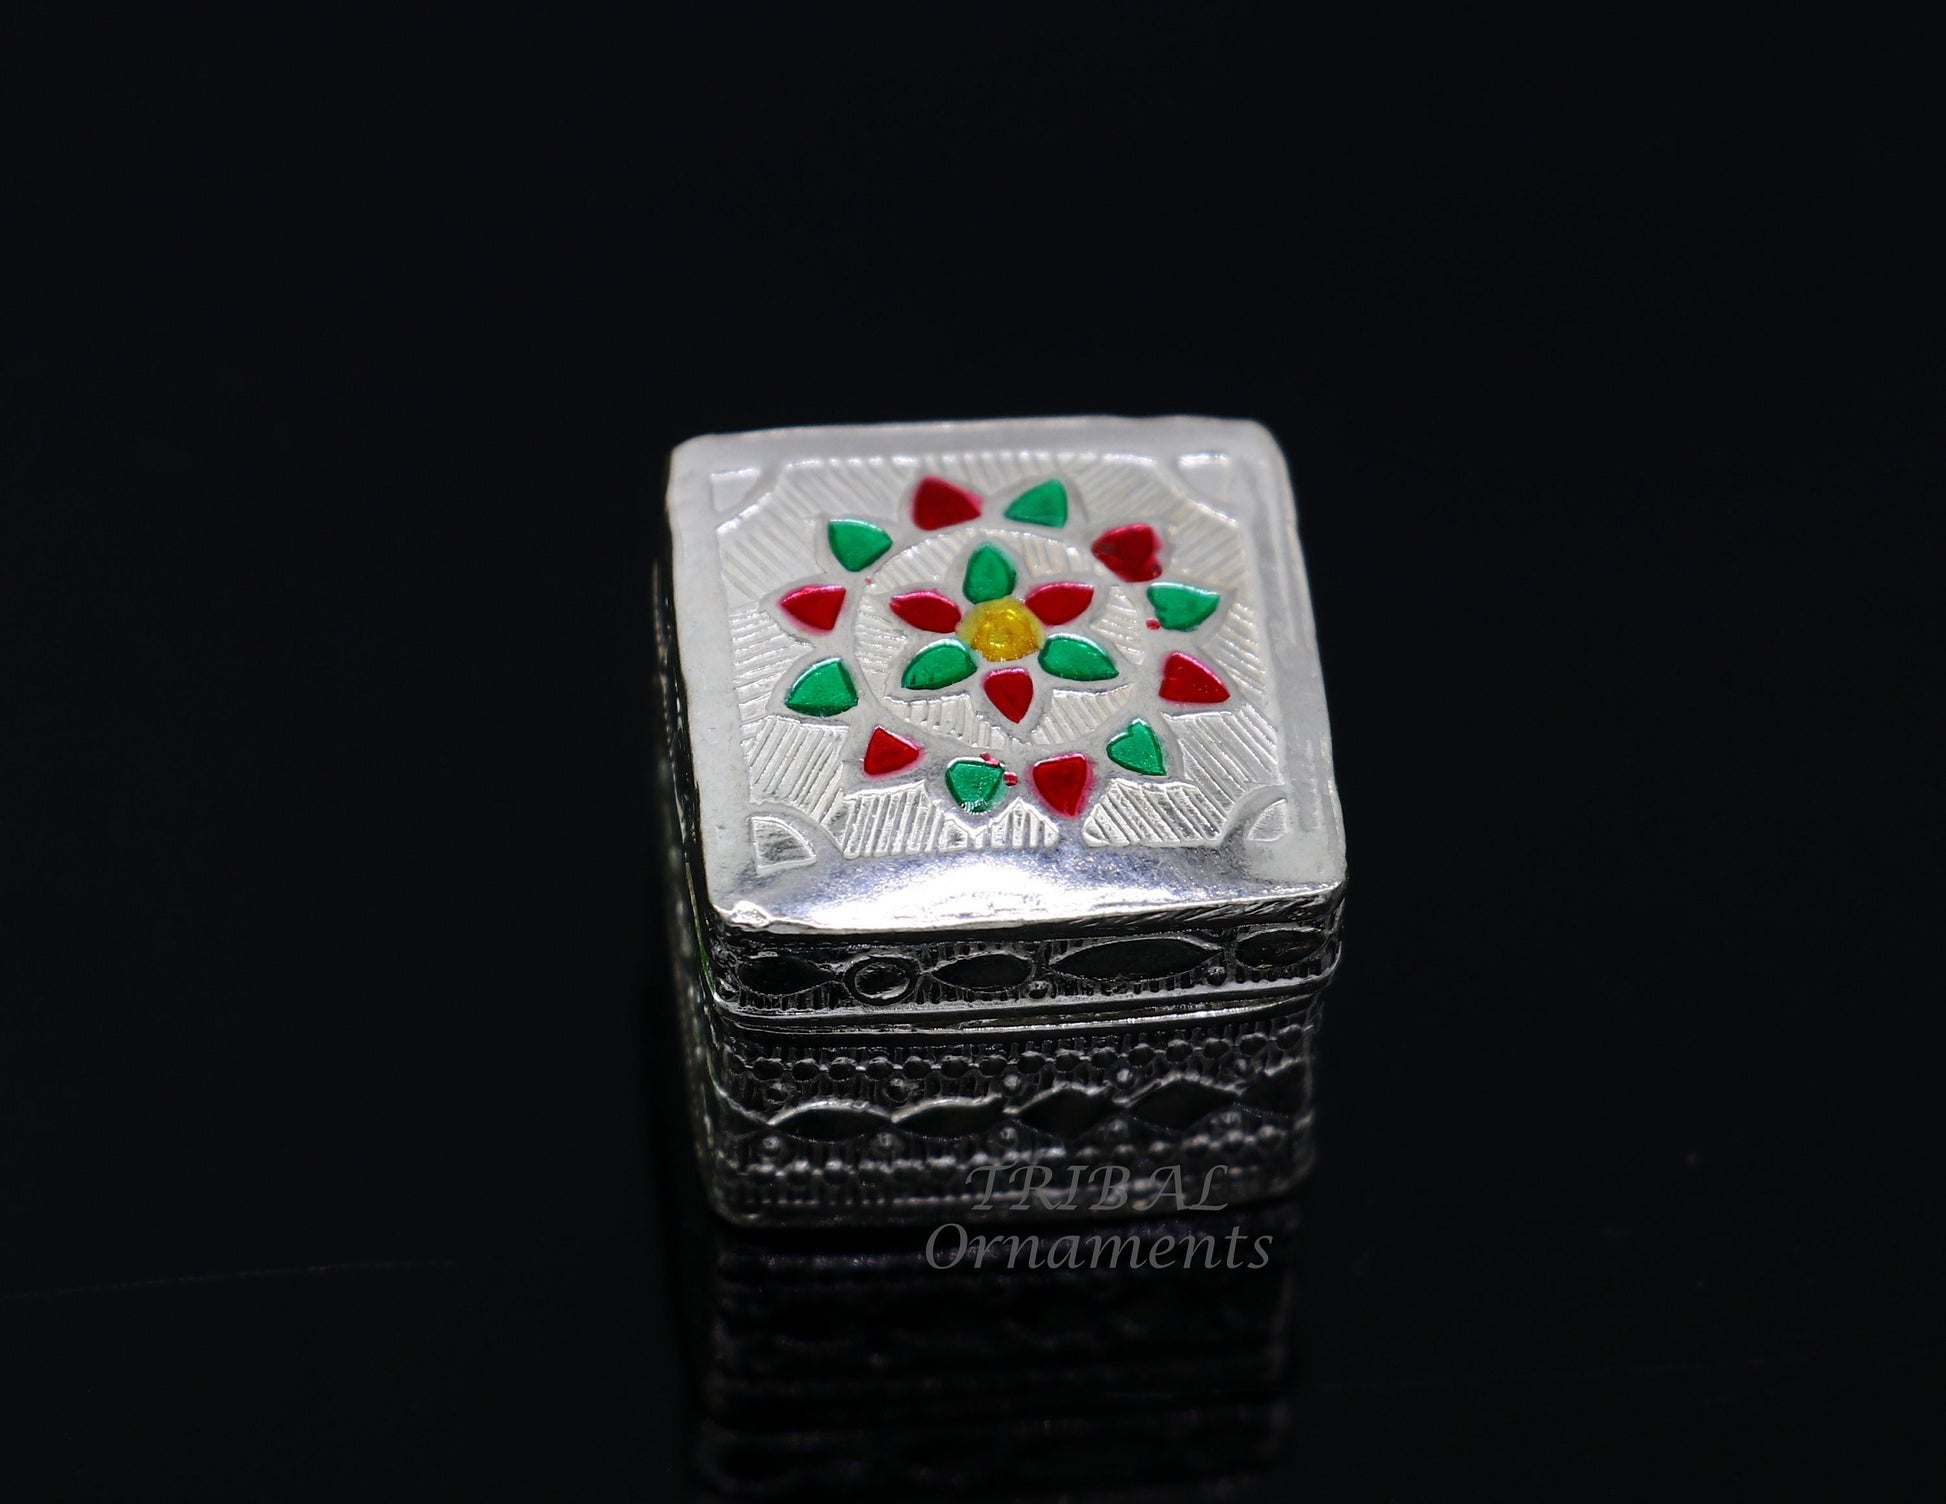 925 sterling silver trinket box, kajal box/casket box bridal square shape box collection, container box, eyeliner box gifting art stb723 - TRIBAL ORNAMENTS